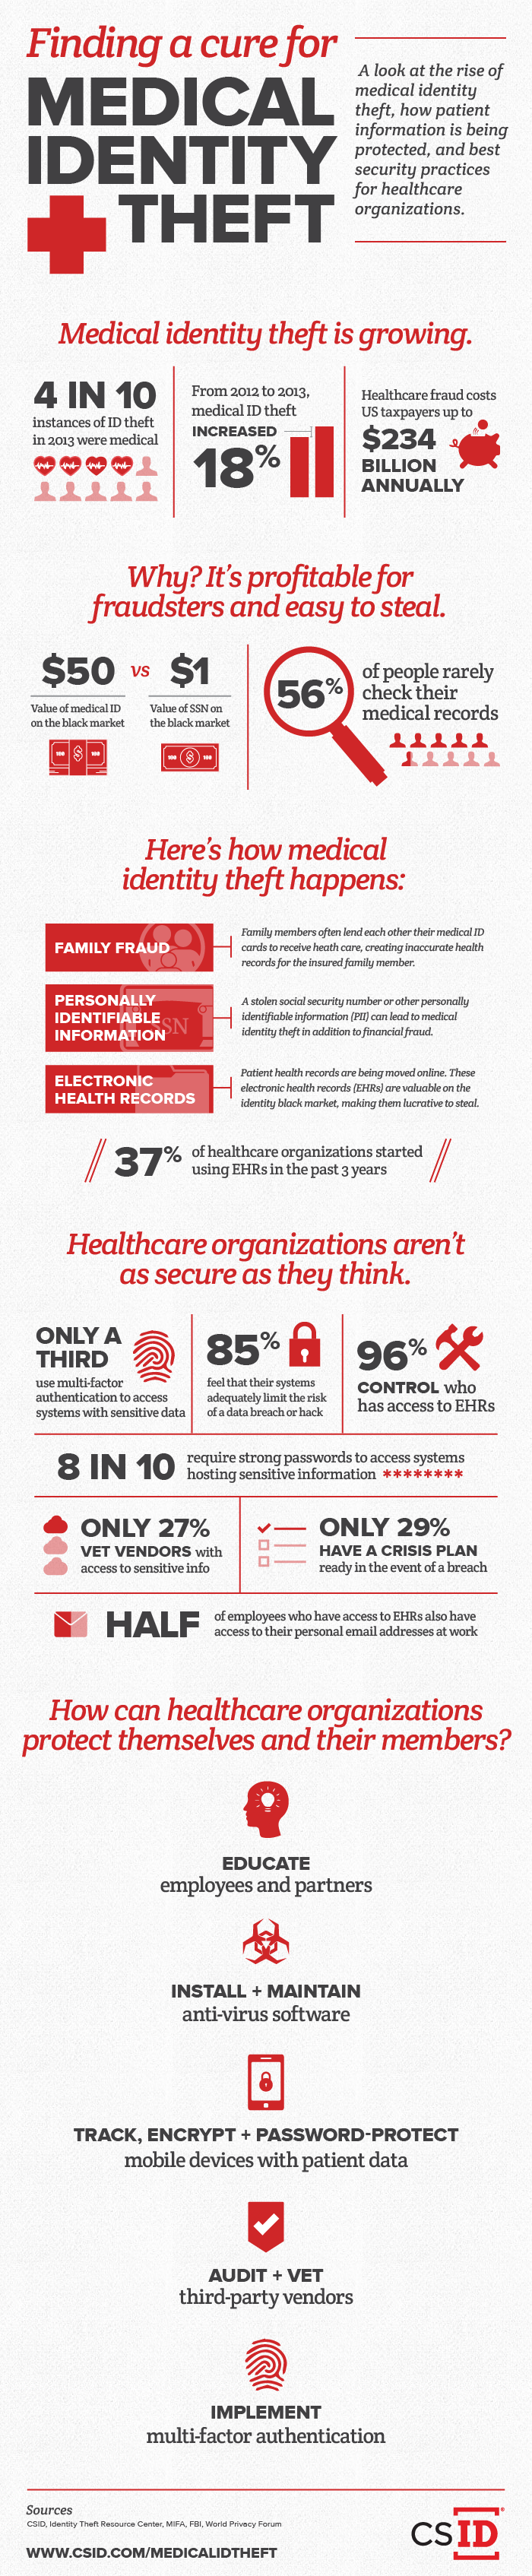 Medical ID Theft Infographic